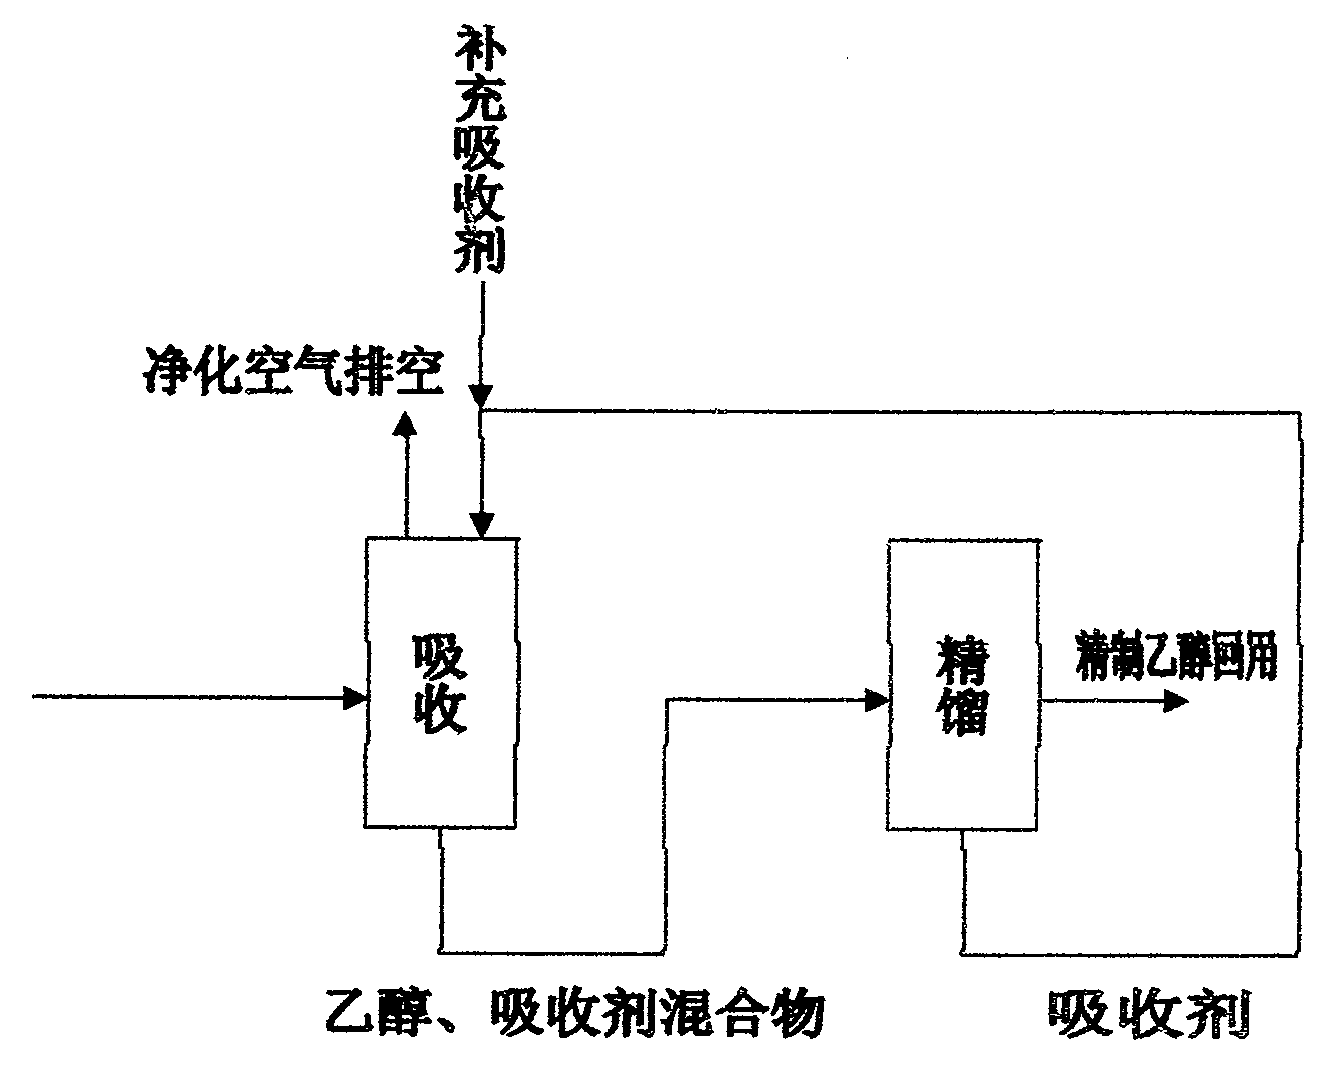 Ethanol-containing waste-gas treatment process flow